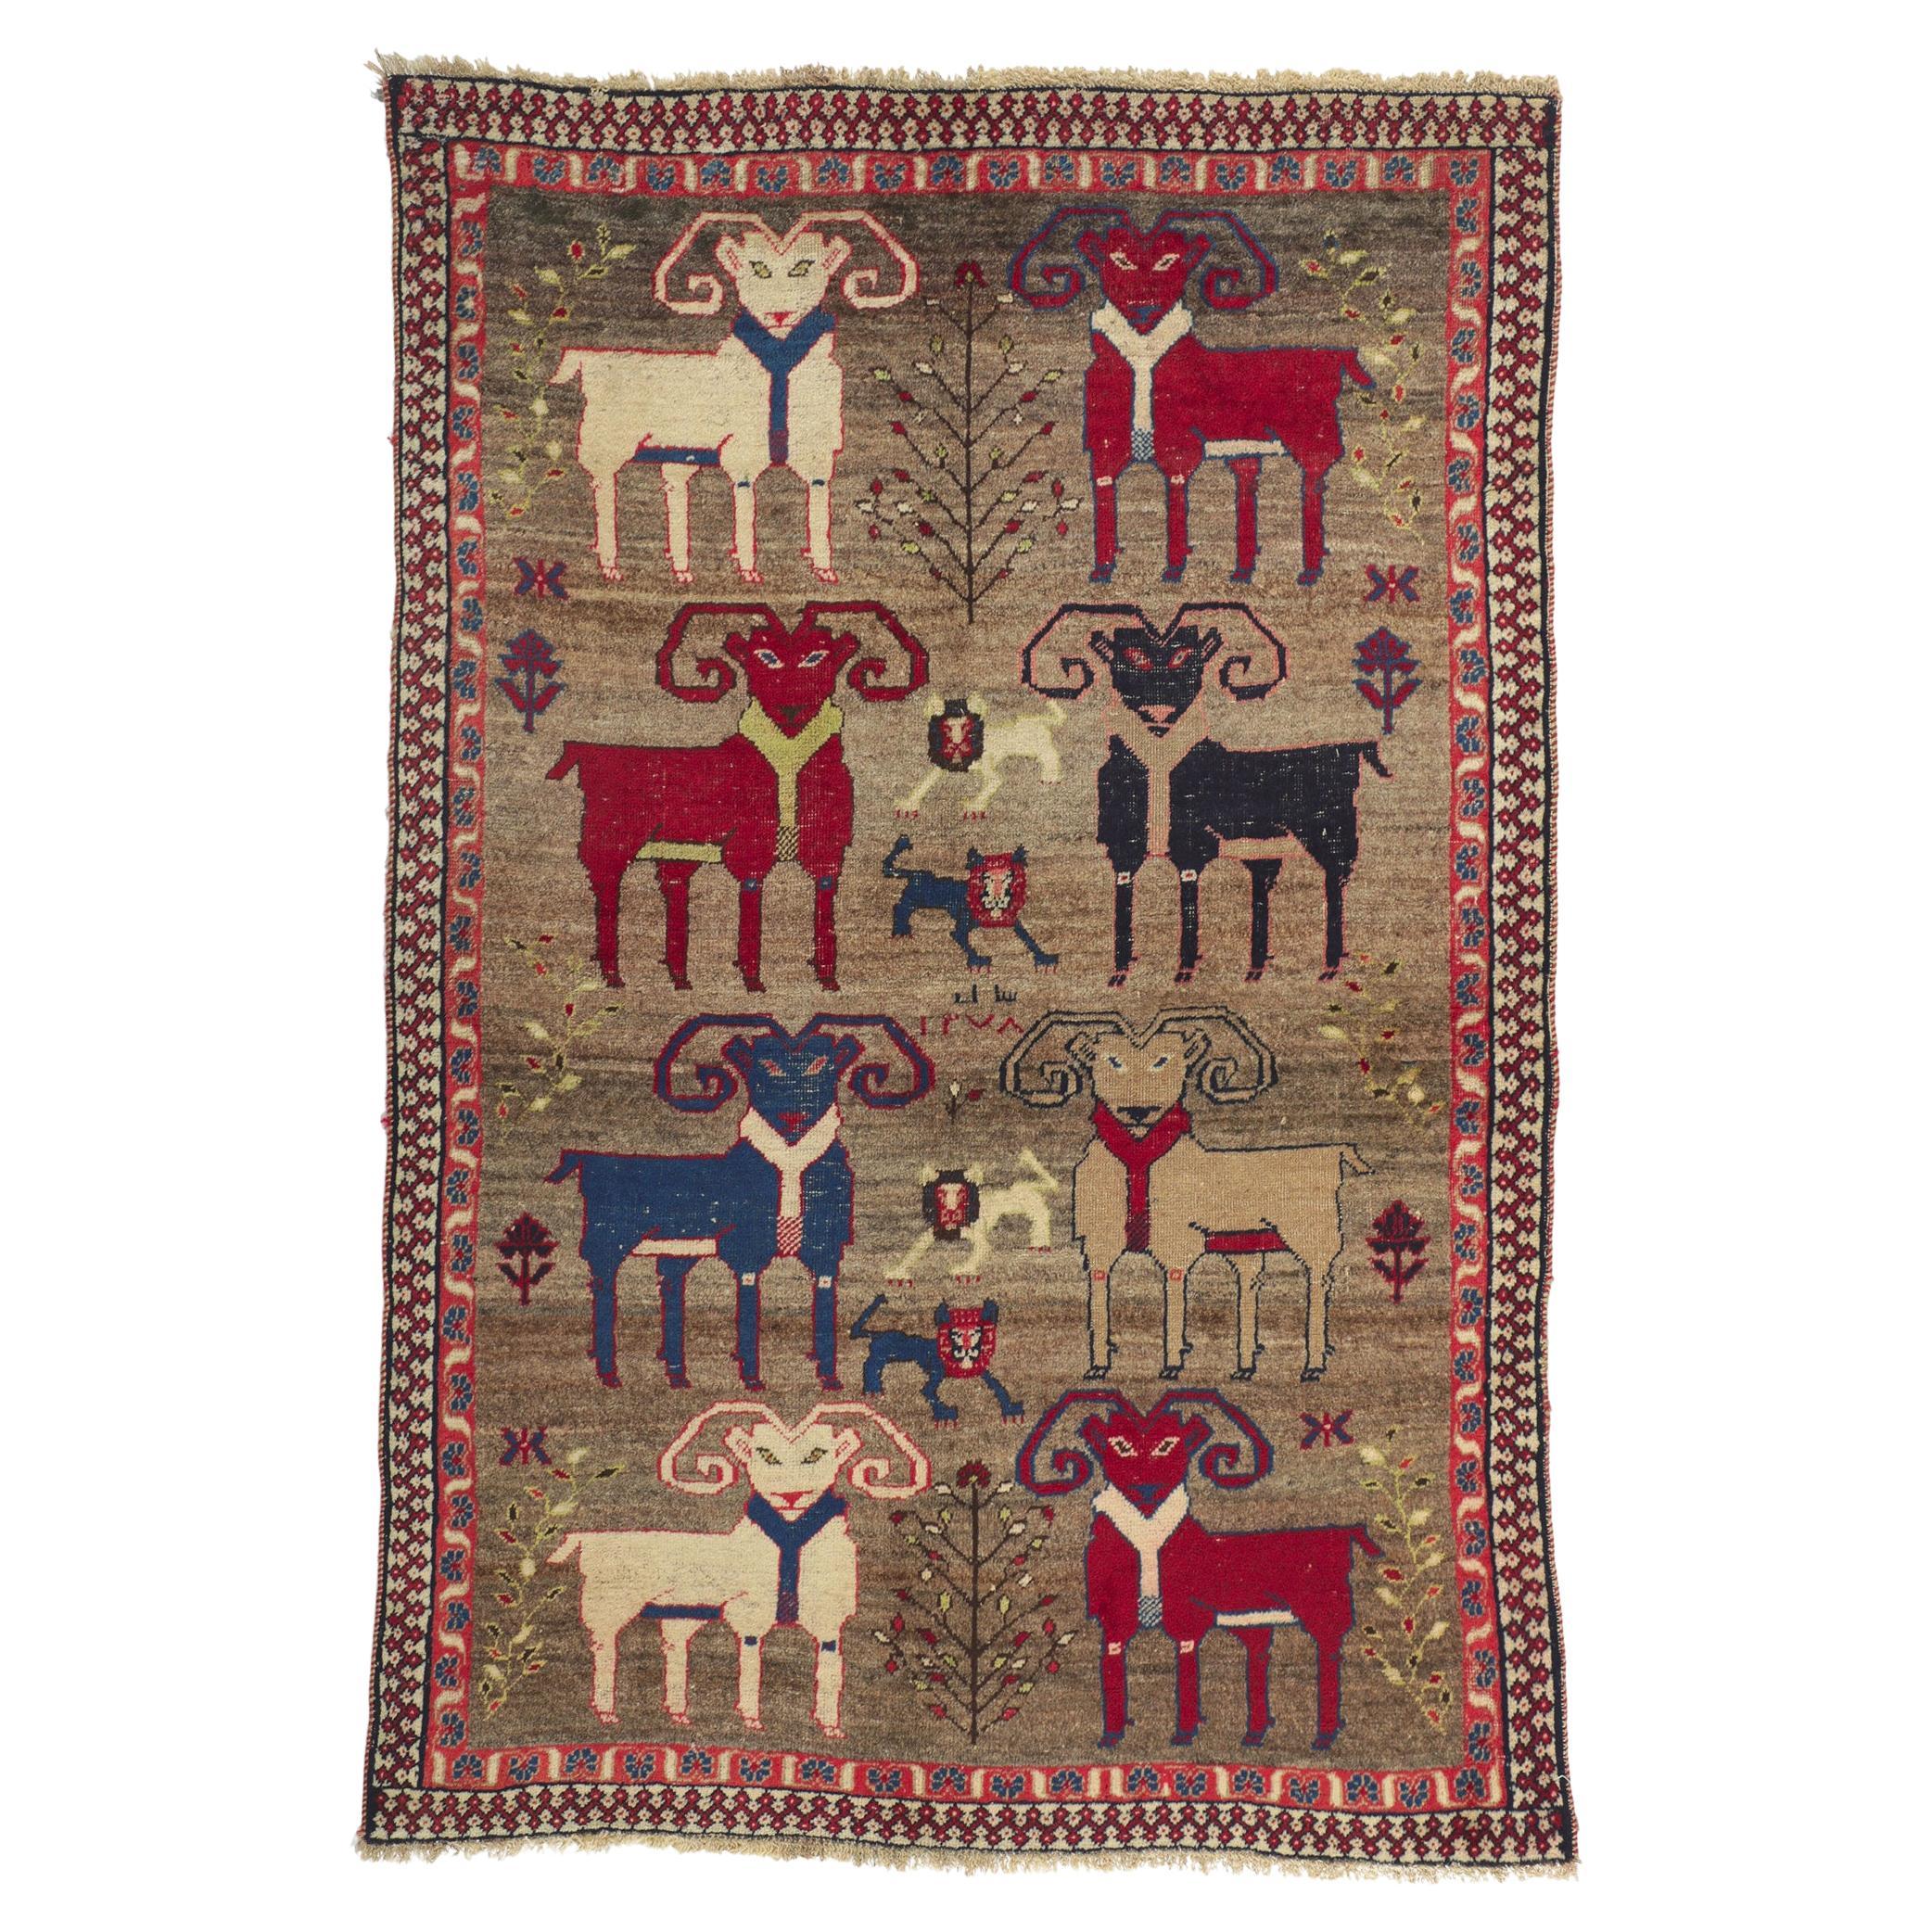 Vintage Persian Gabbeh Animal Pictorial Rug with Rams and Lions